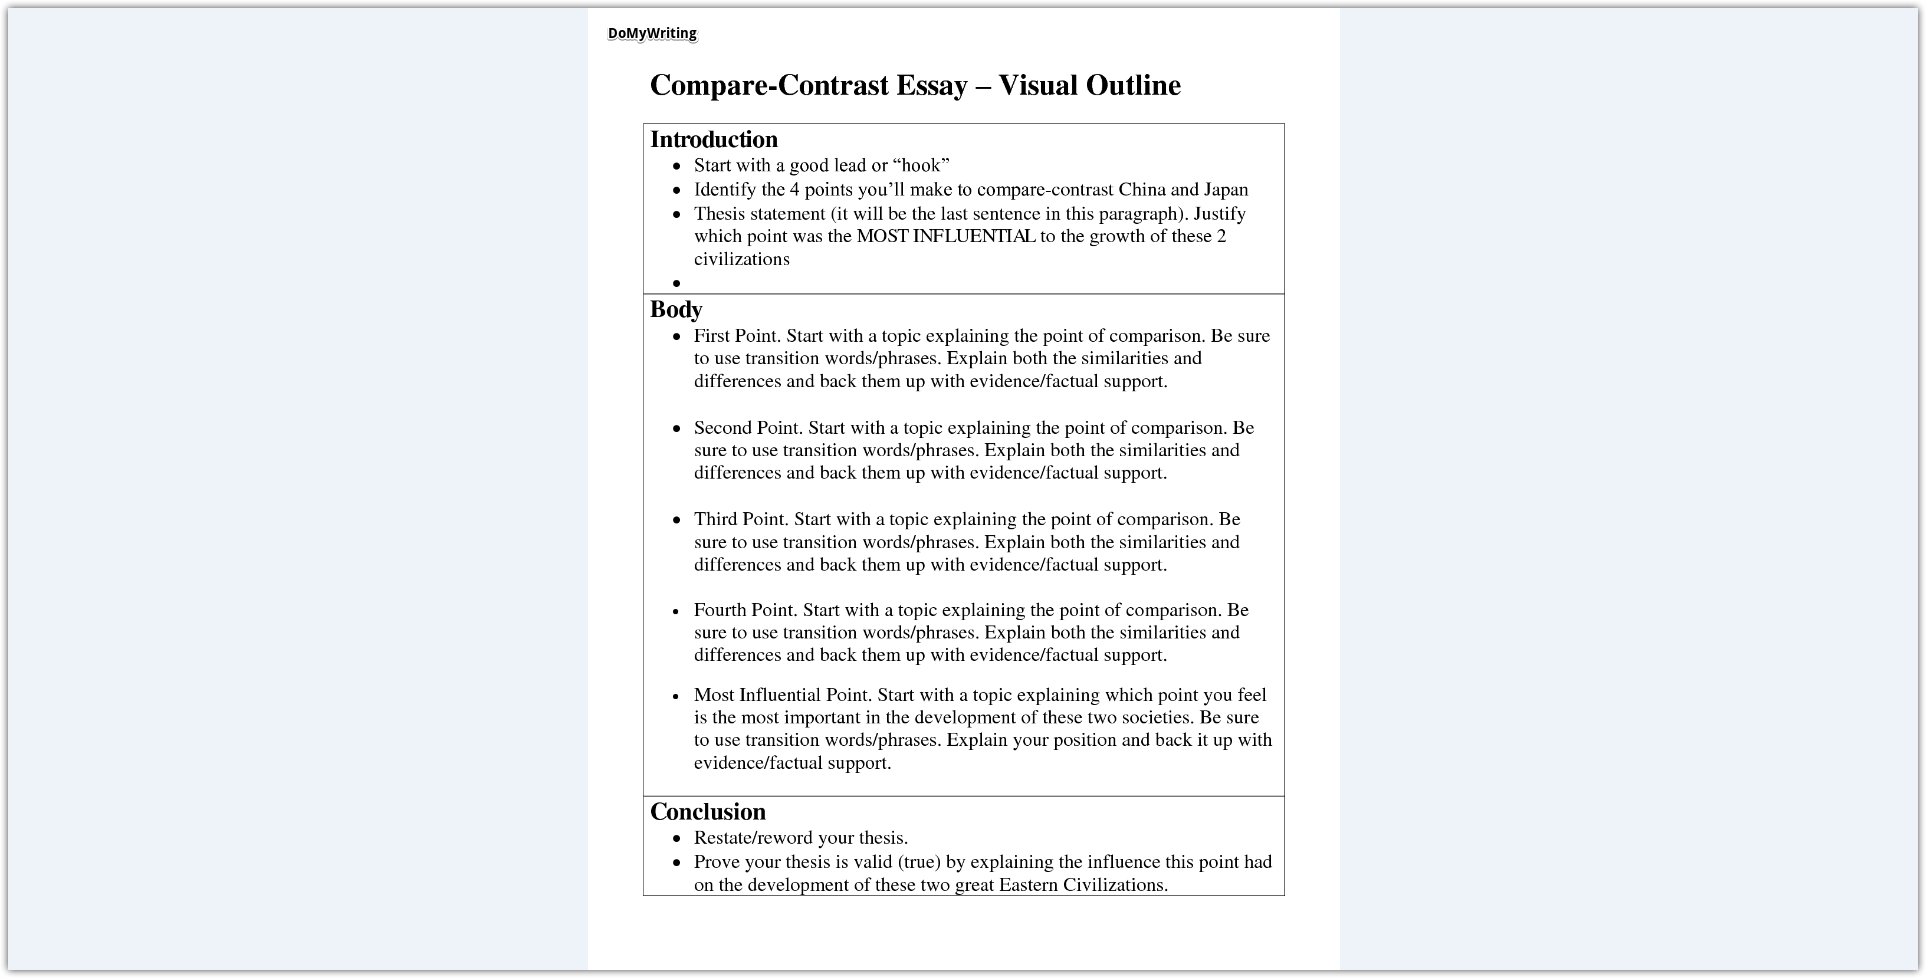 Compare and contrast essay outline